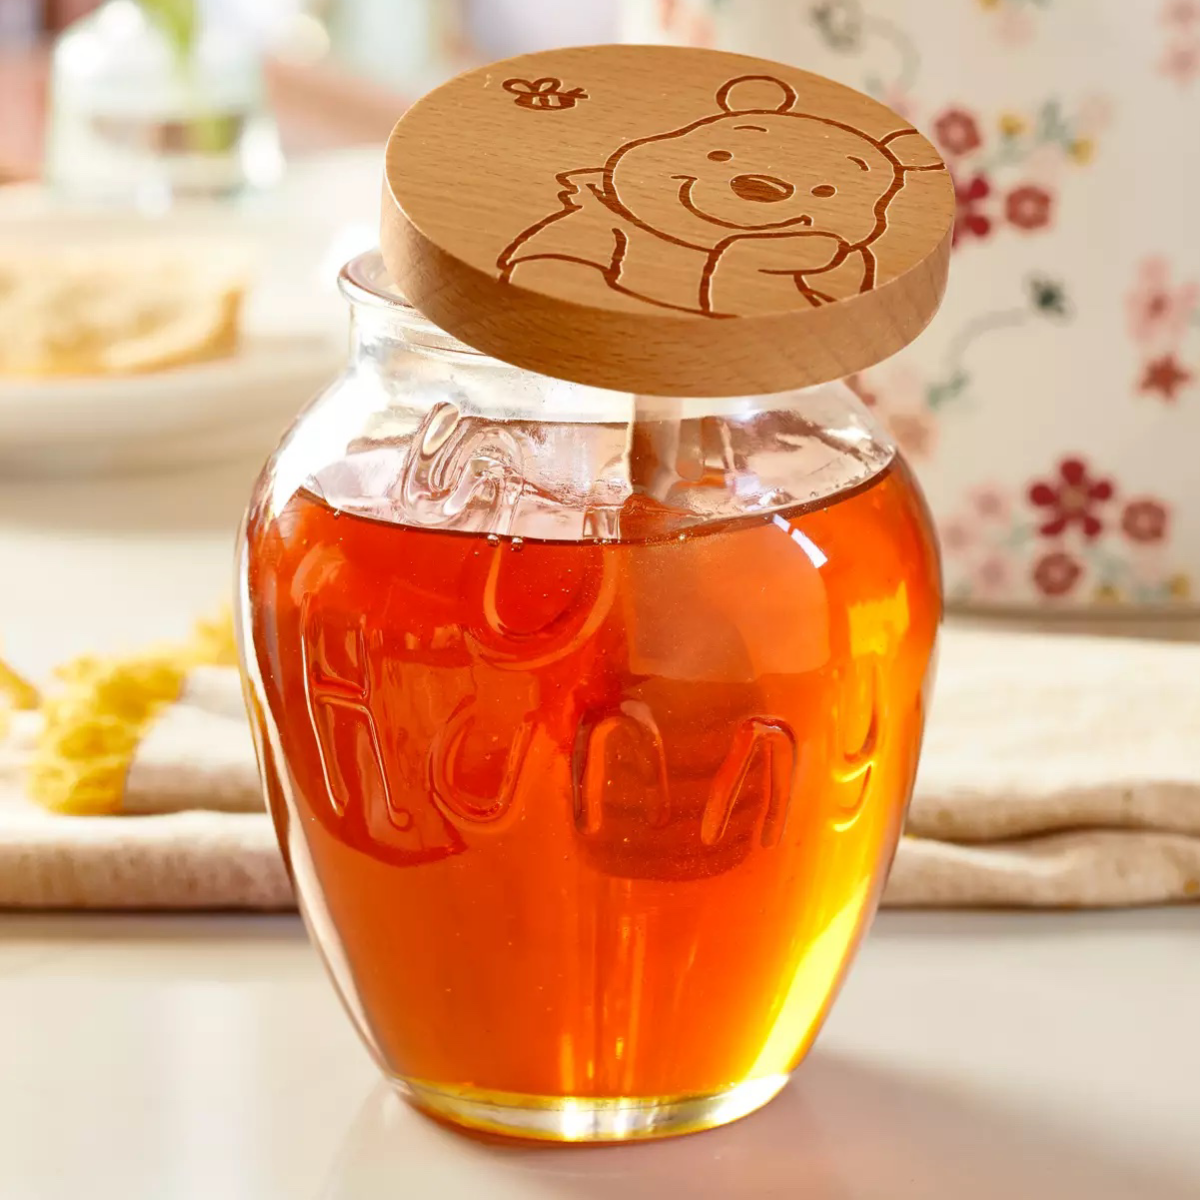 New on shopDisney (3/12/18): 5 Disney Kitchen Items That Will Make Your  Home Happy - Inside the Magic